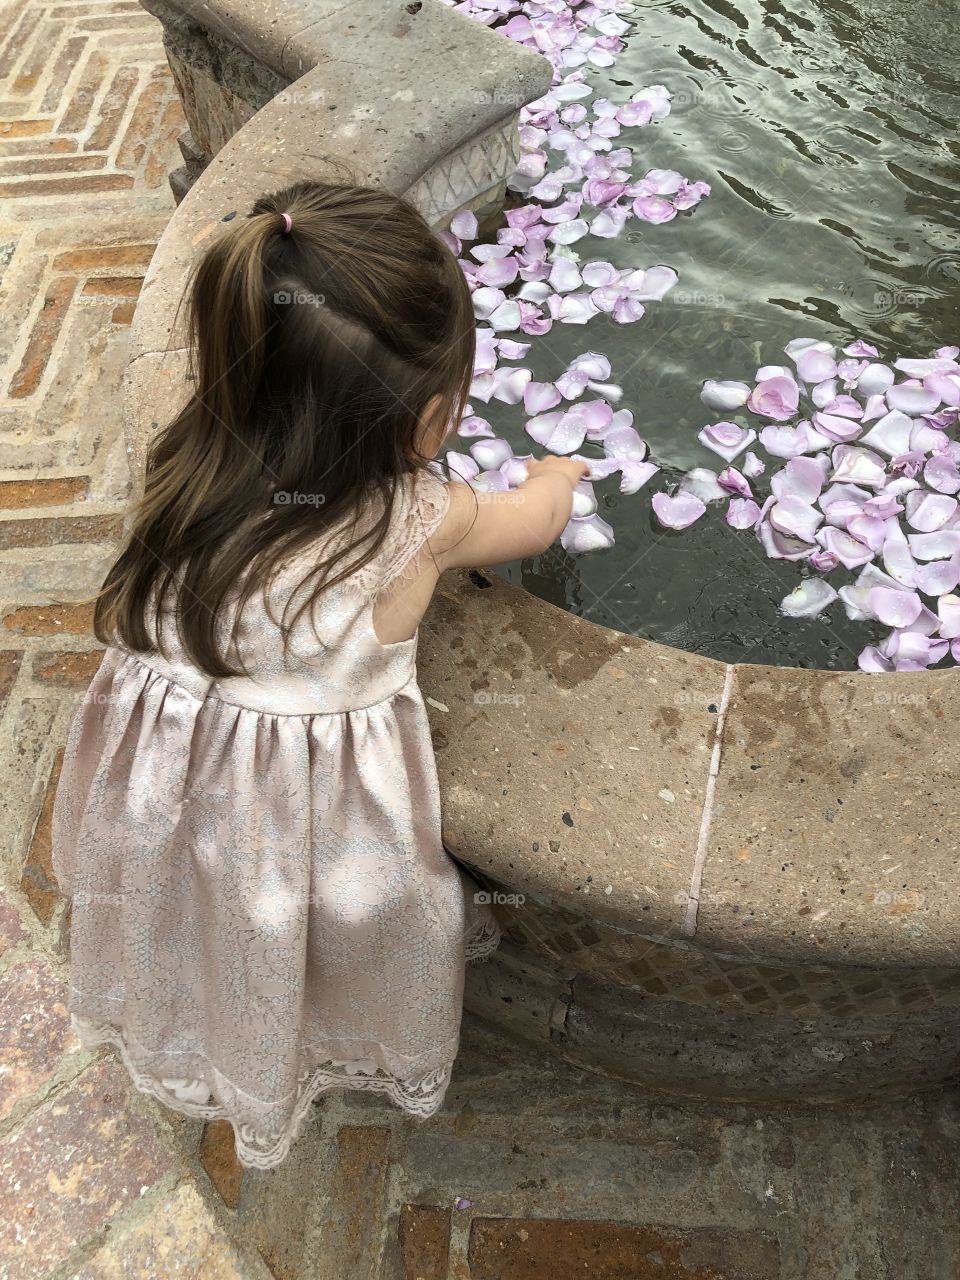 Little girl plays with flower petals in fountain